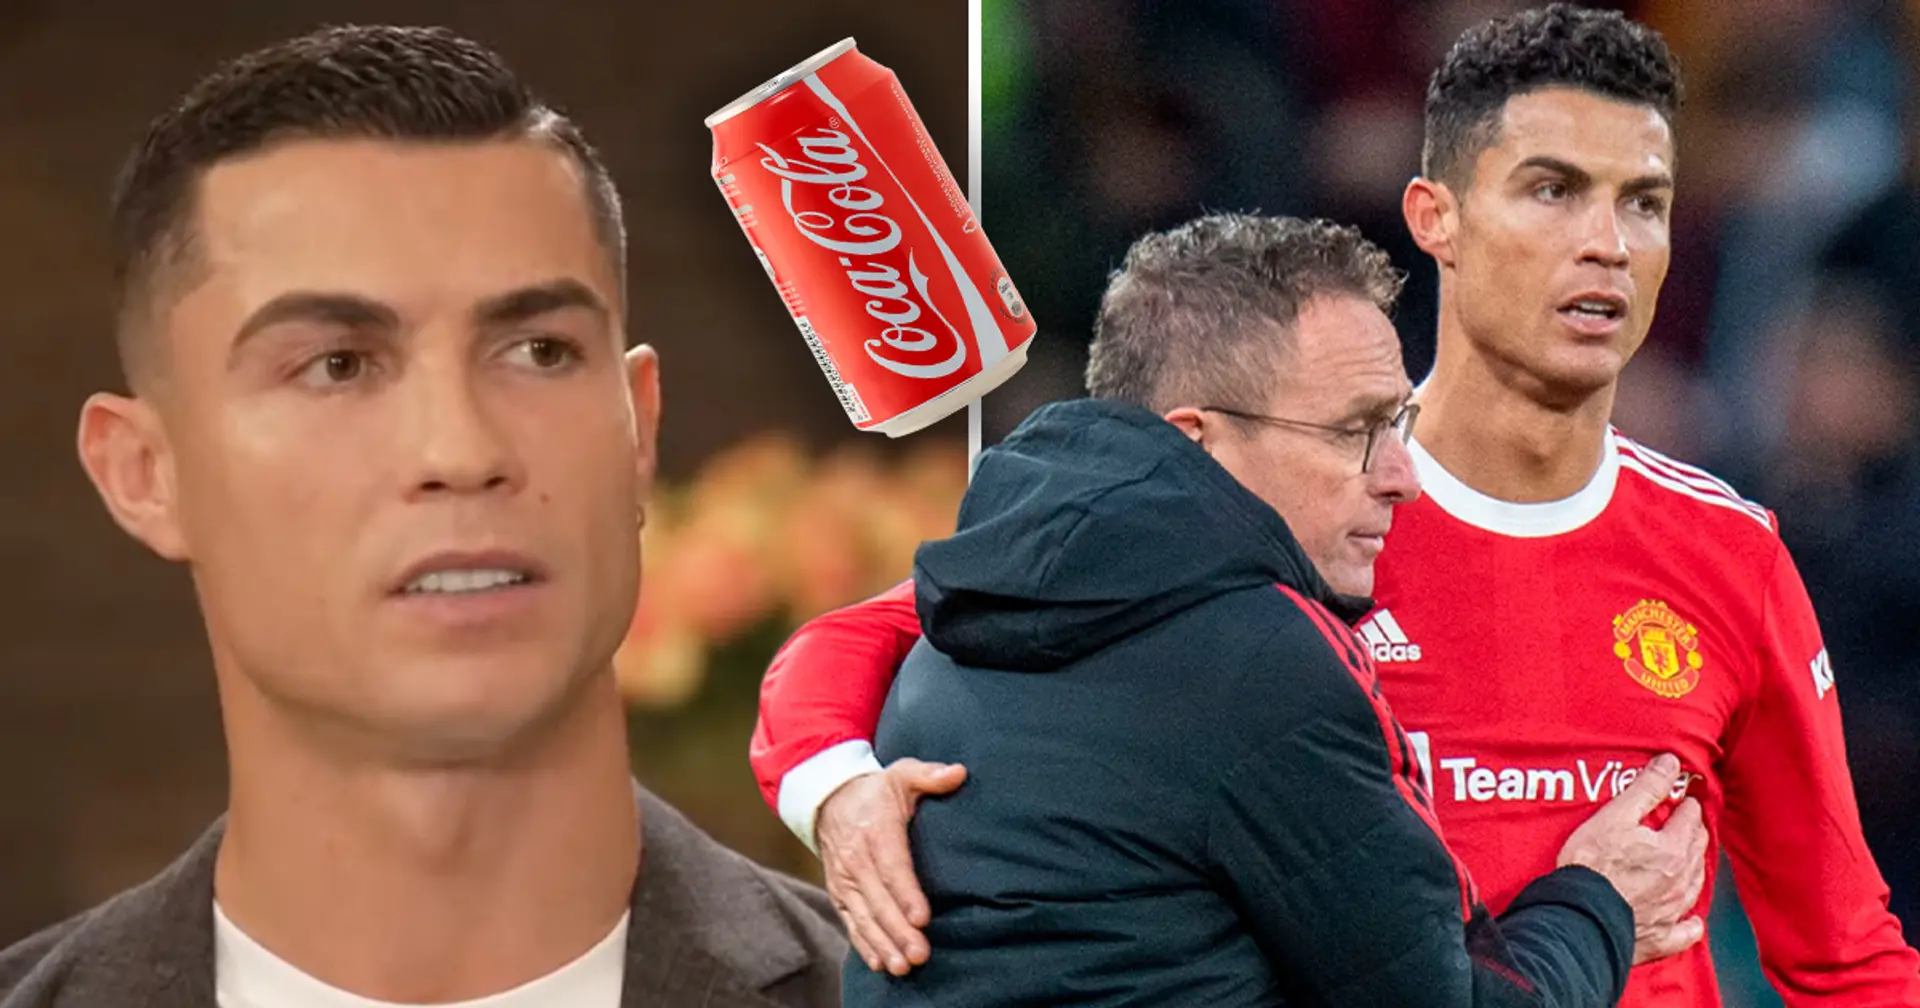 Ronaldo ridicules Rangnick's pressing style: 'These new coaches think they find the last Coca-Cola in the desert'